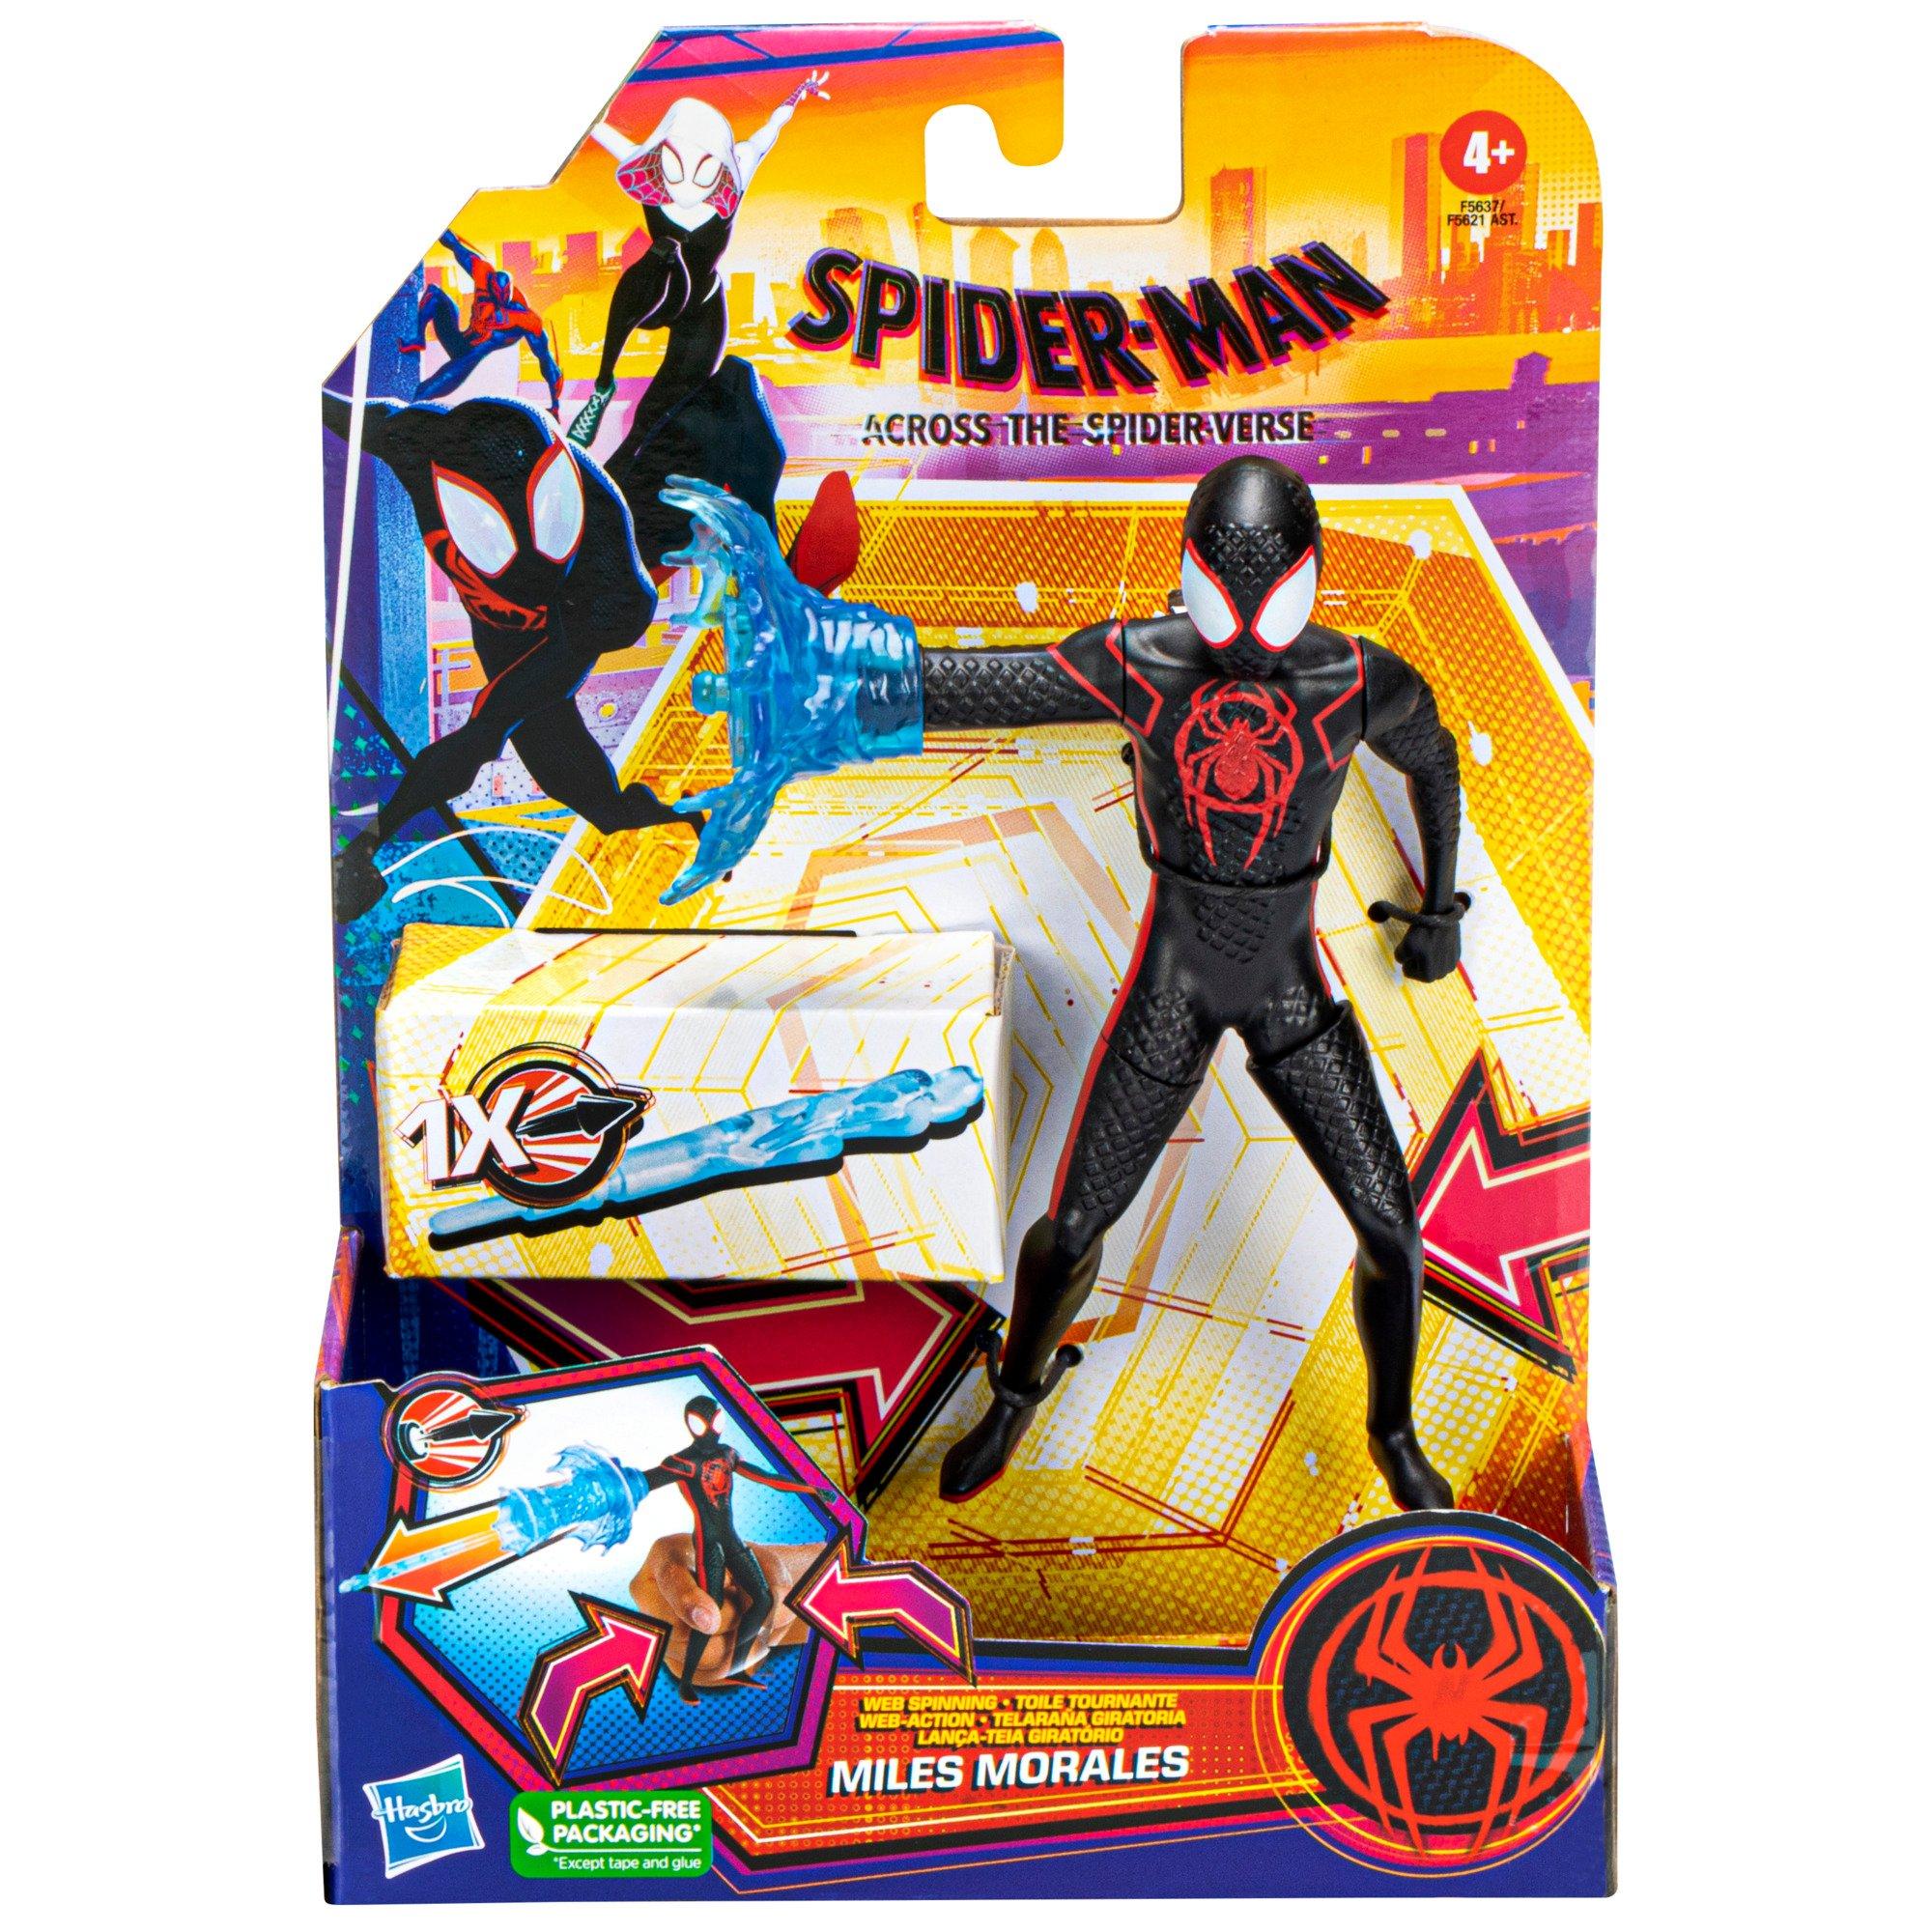 Marvel Spider-Man: Across The Spider-Verse Spider-Man Toy, 6-Inch-Scale  Action Figure with Web Accessory, Toys for Kids Ages 4 and Up